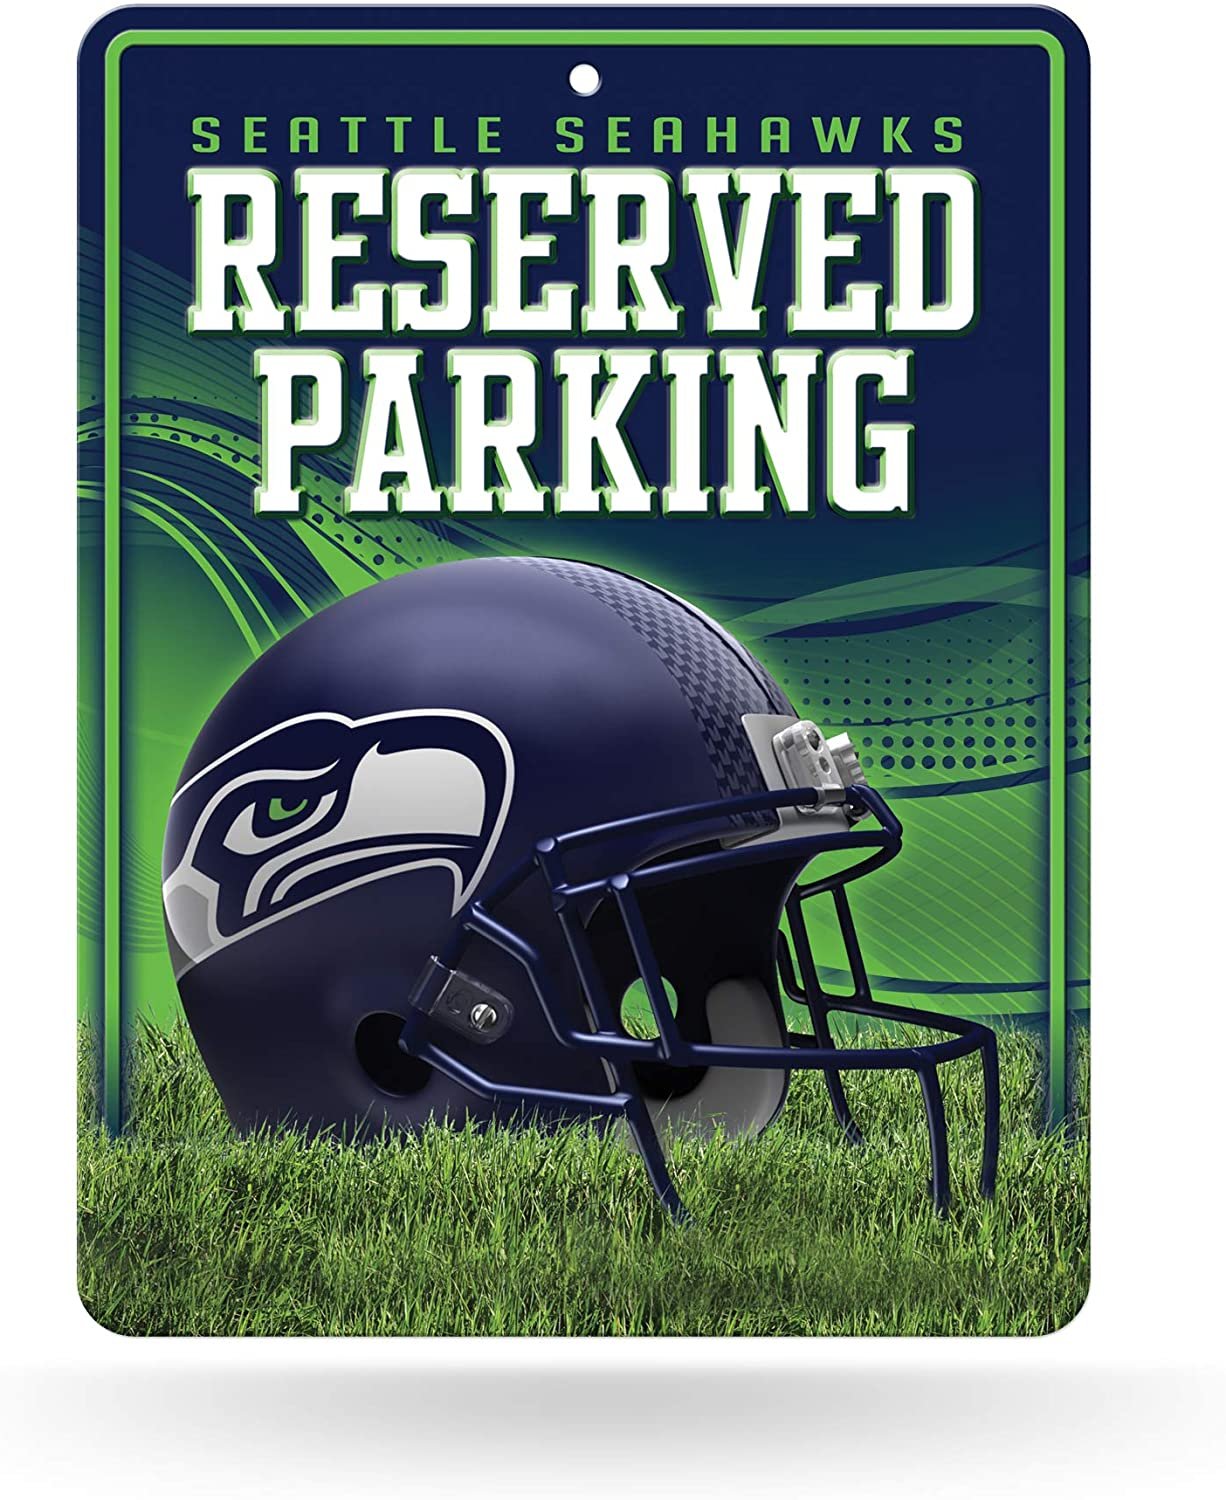 Seattle Seahawks 8-Inch by 11-Inch Metal Parking Sign Décor